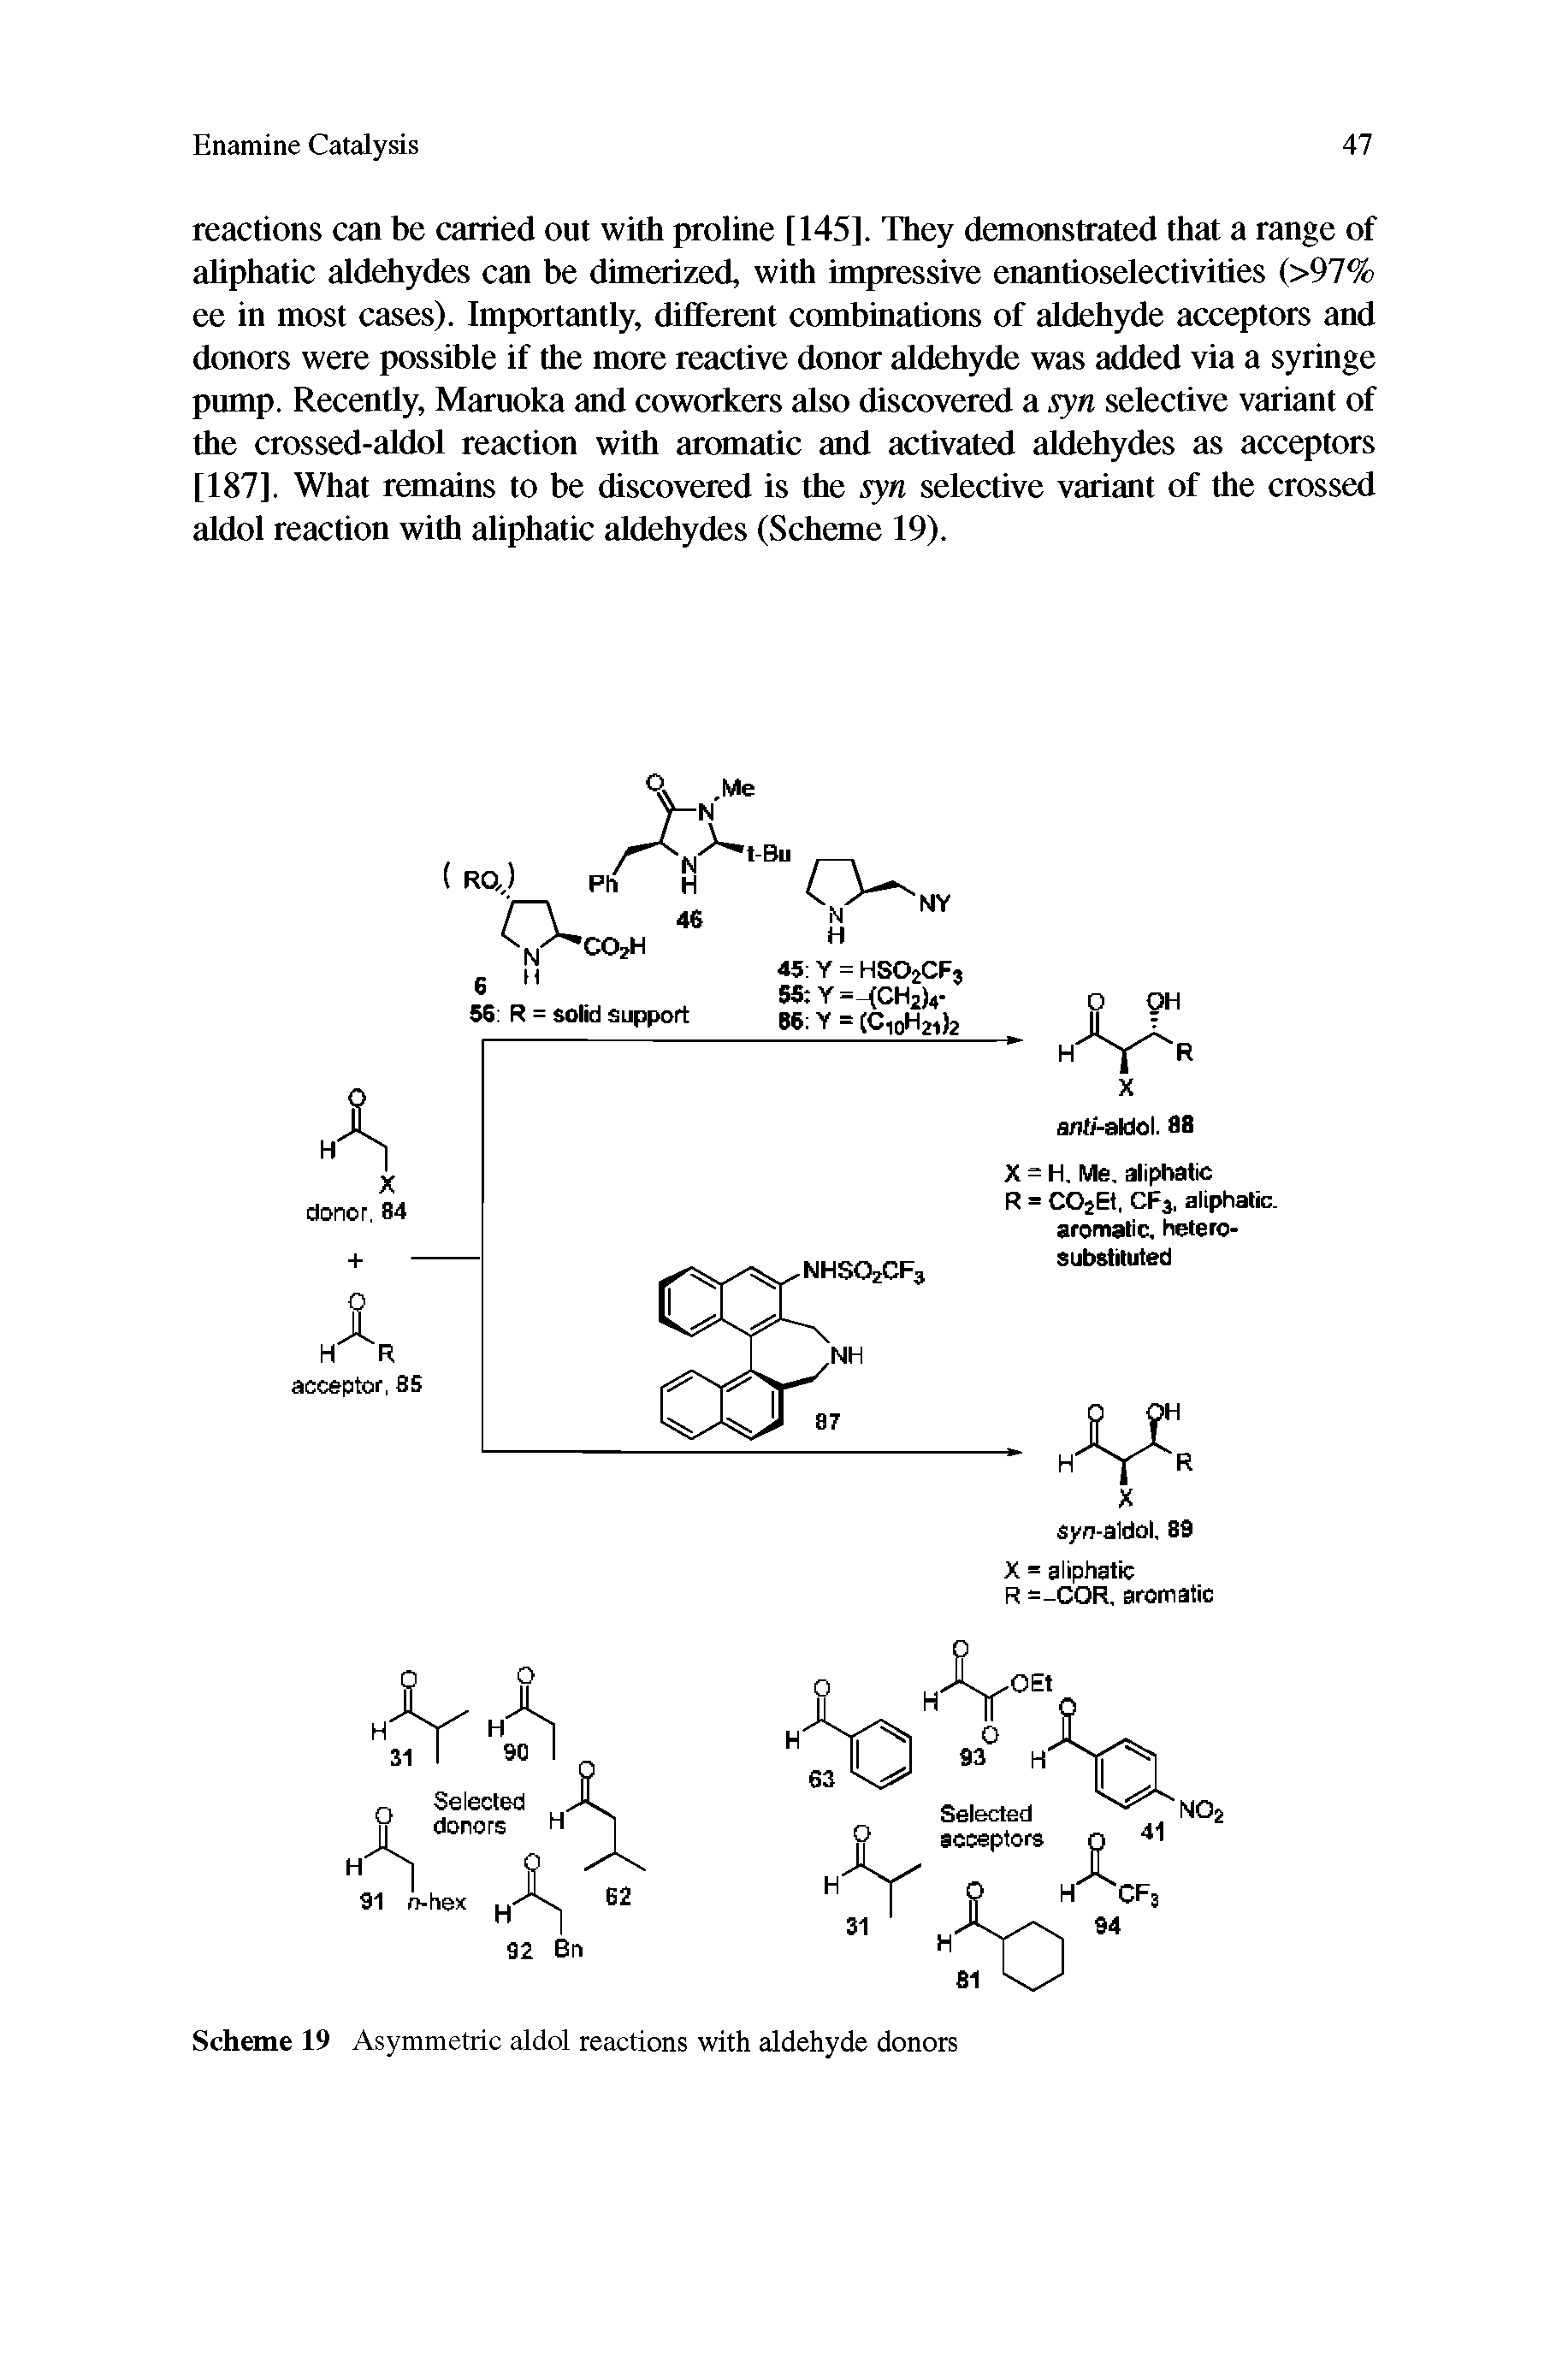 Scheme 19 Asymmetric aldol reactions with aldehyde donors...